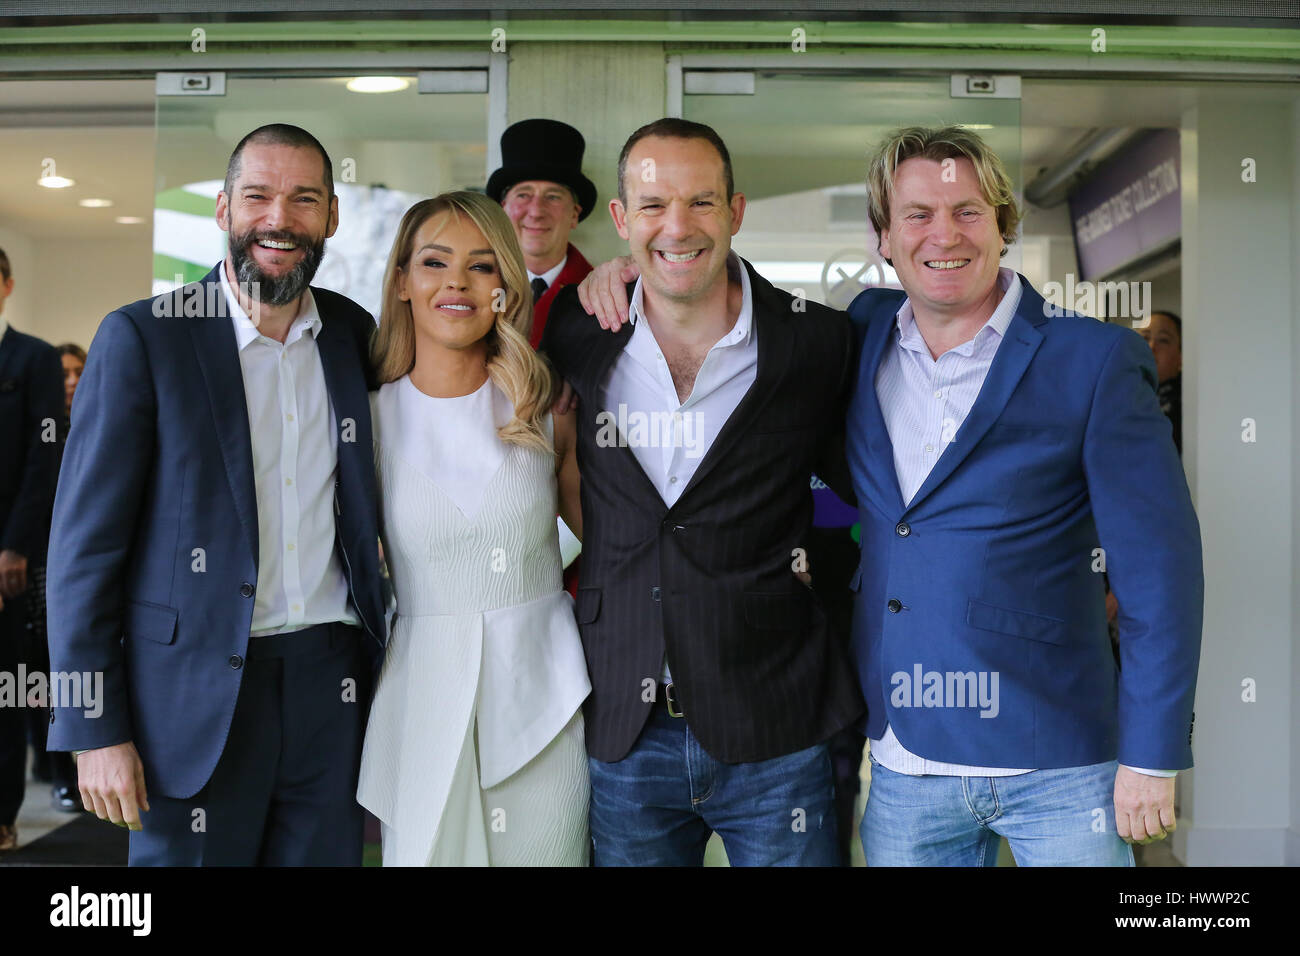 Olympia London, UK. 24th Mar, 2017. Fred Sirieix, Katie Piper, Martin Lewis and David Domoney (l to r). Katie Piper, Fred Sirieix and Martin Lewis officially open the Ideal Home Show sponsored by Zoopla at Olympia London. Celebrities take part in the launch the Ideal Home Show. Credit: Dinendra Haria/Alamy Live News Stock Photo